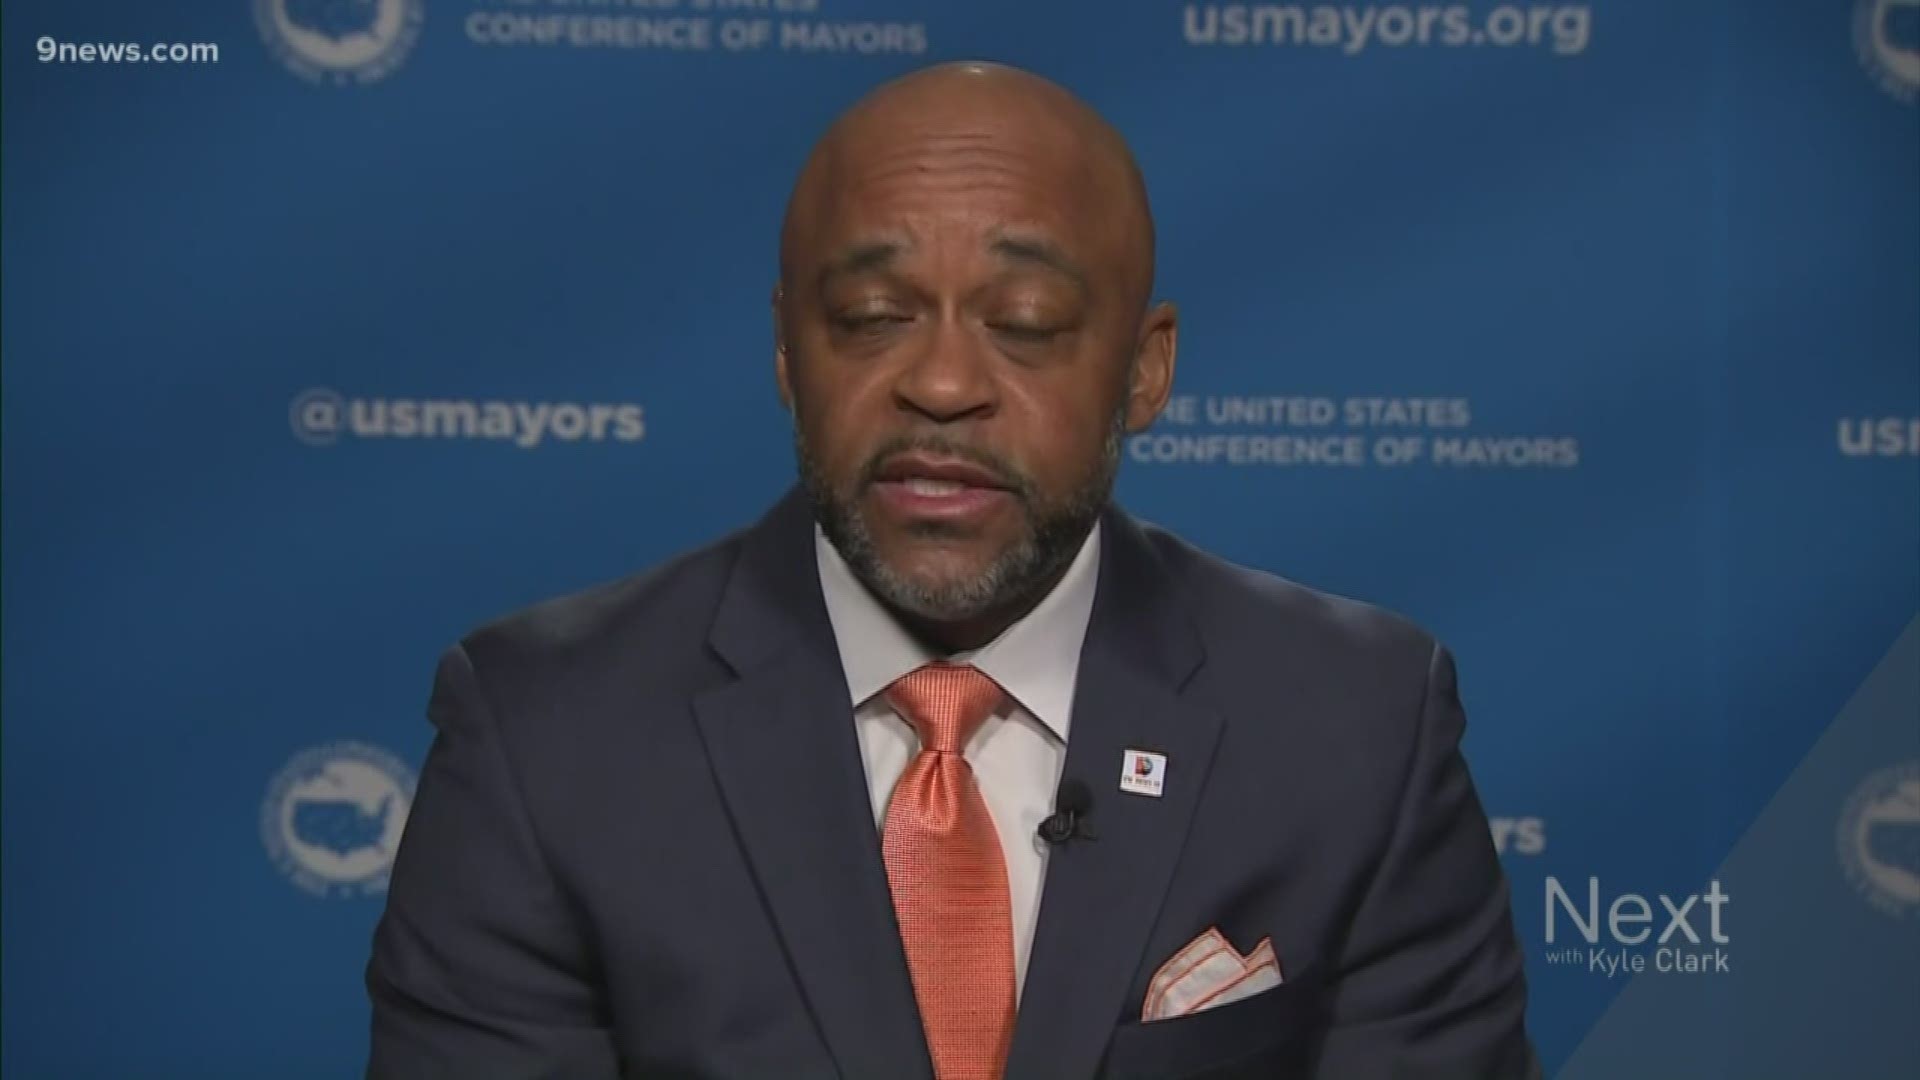 Today, Mayor Michael Hancock repeated his argument that repealing the city's camping ban is not the answer.